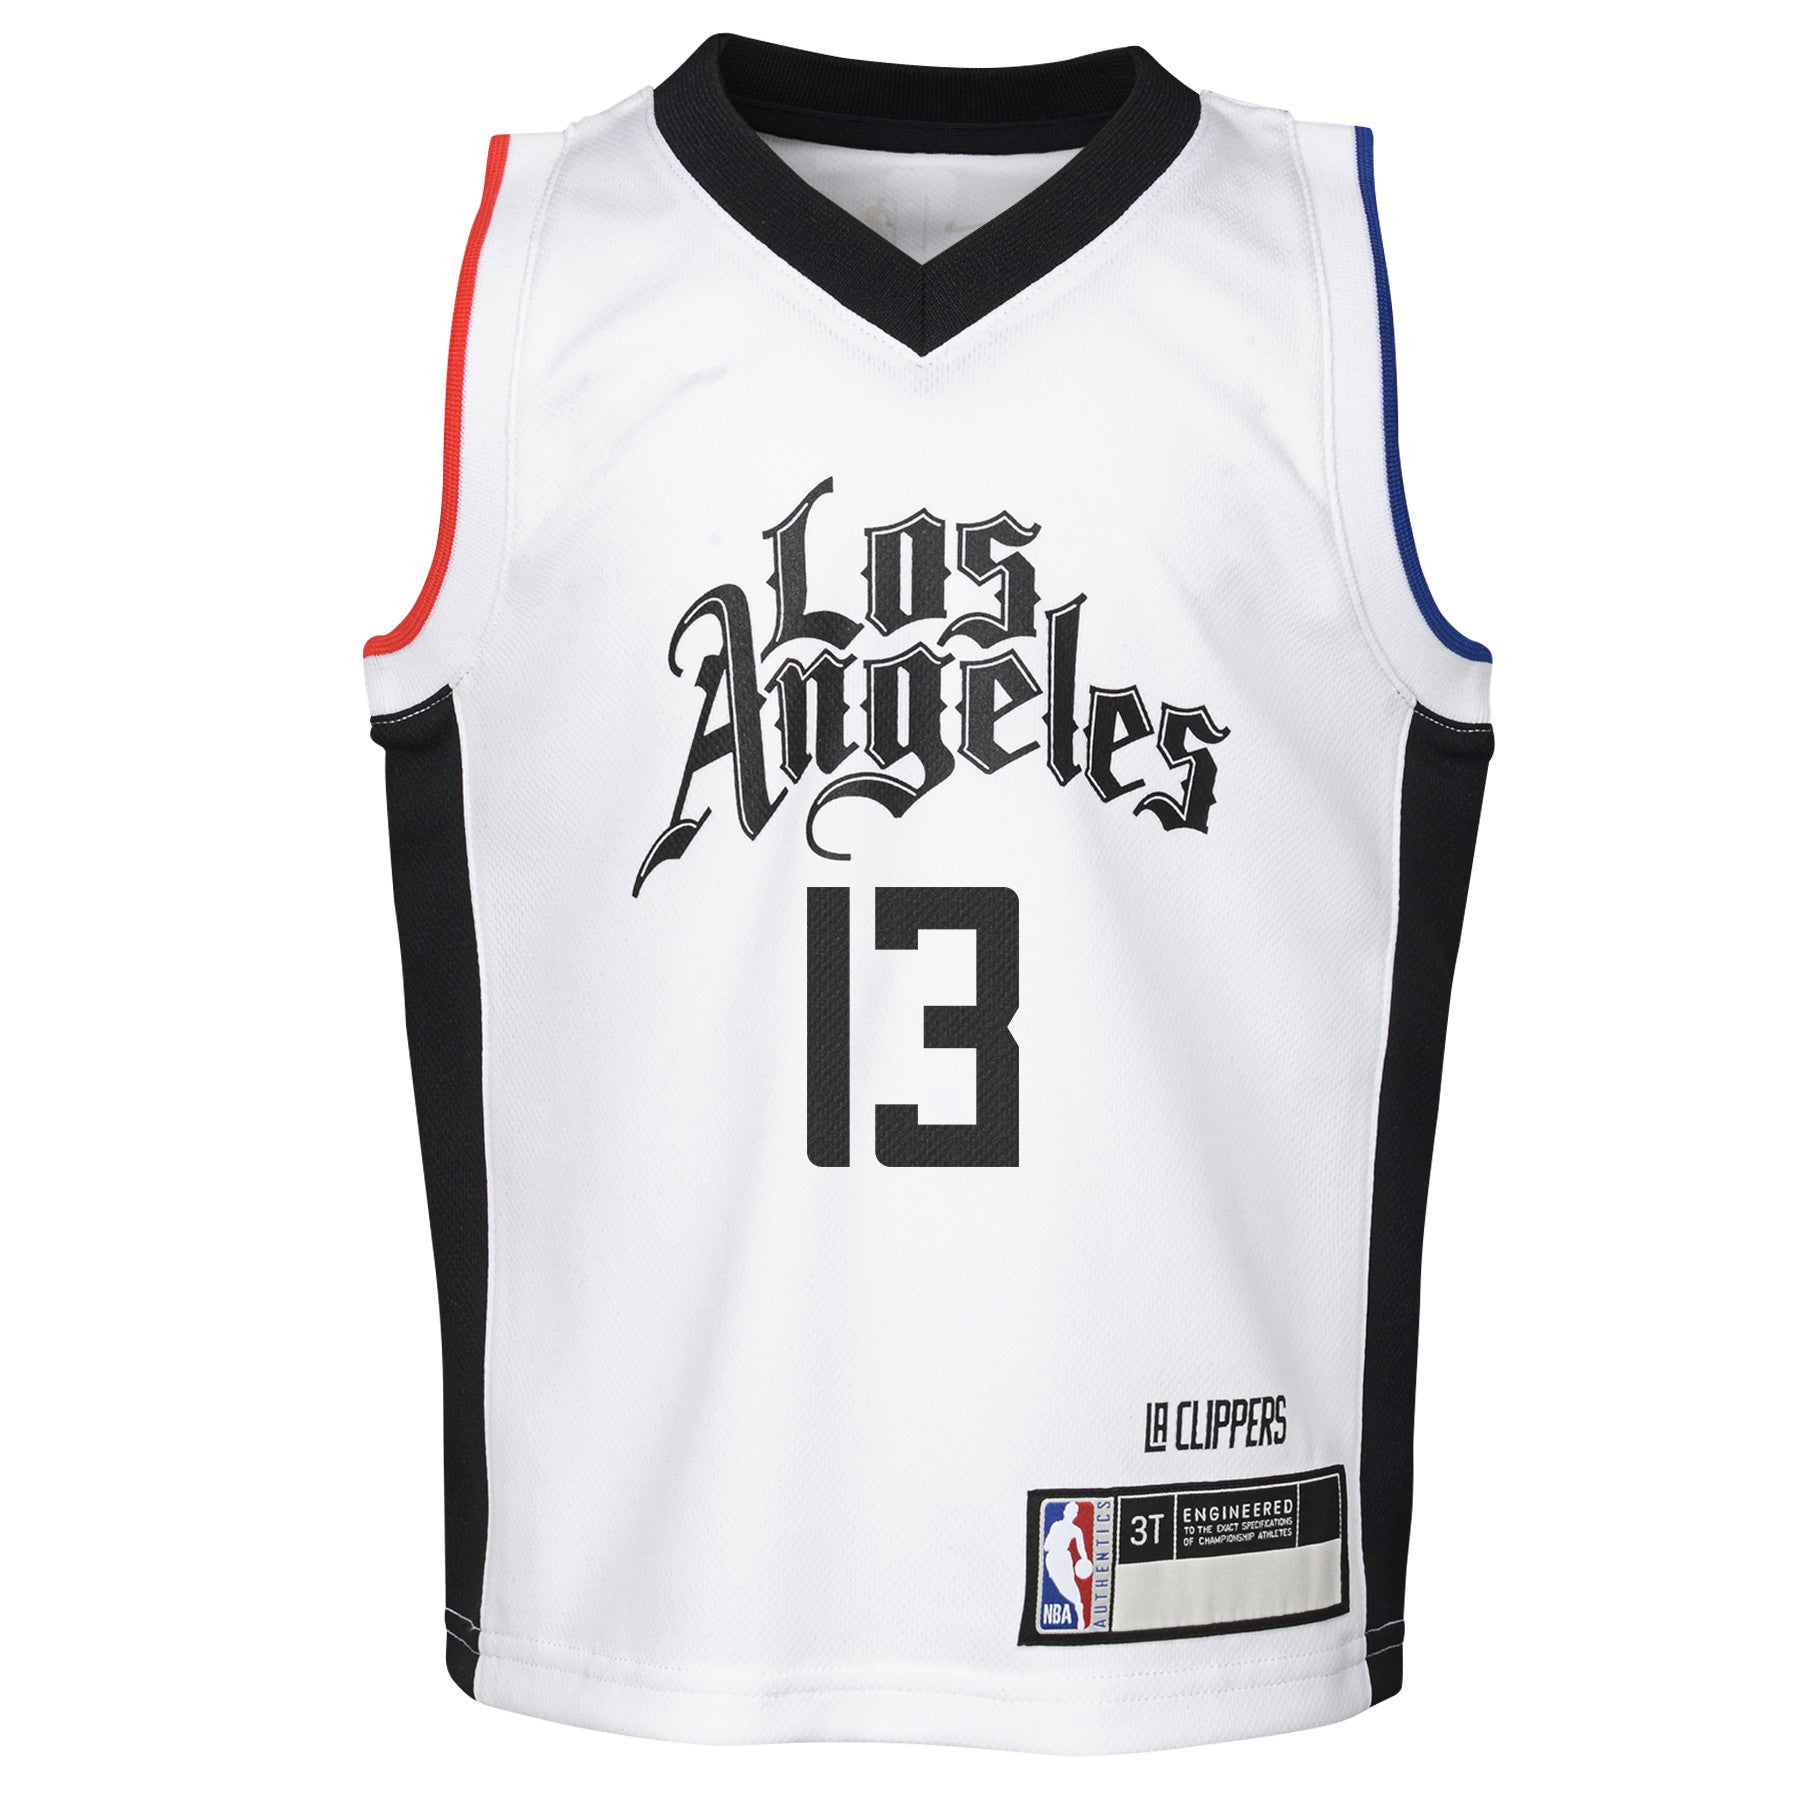 Nike NBA Kids (4-7) Los Angeles Clippers Paul George #13 City Edition Jersey